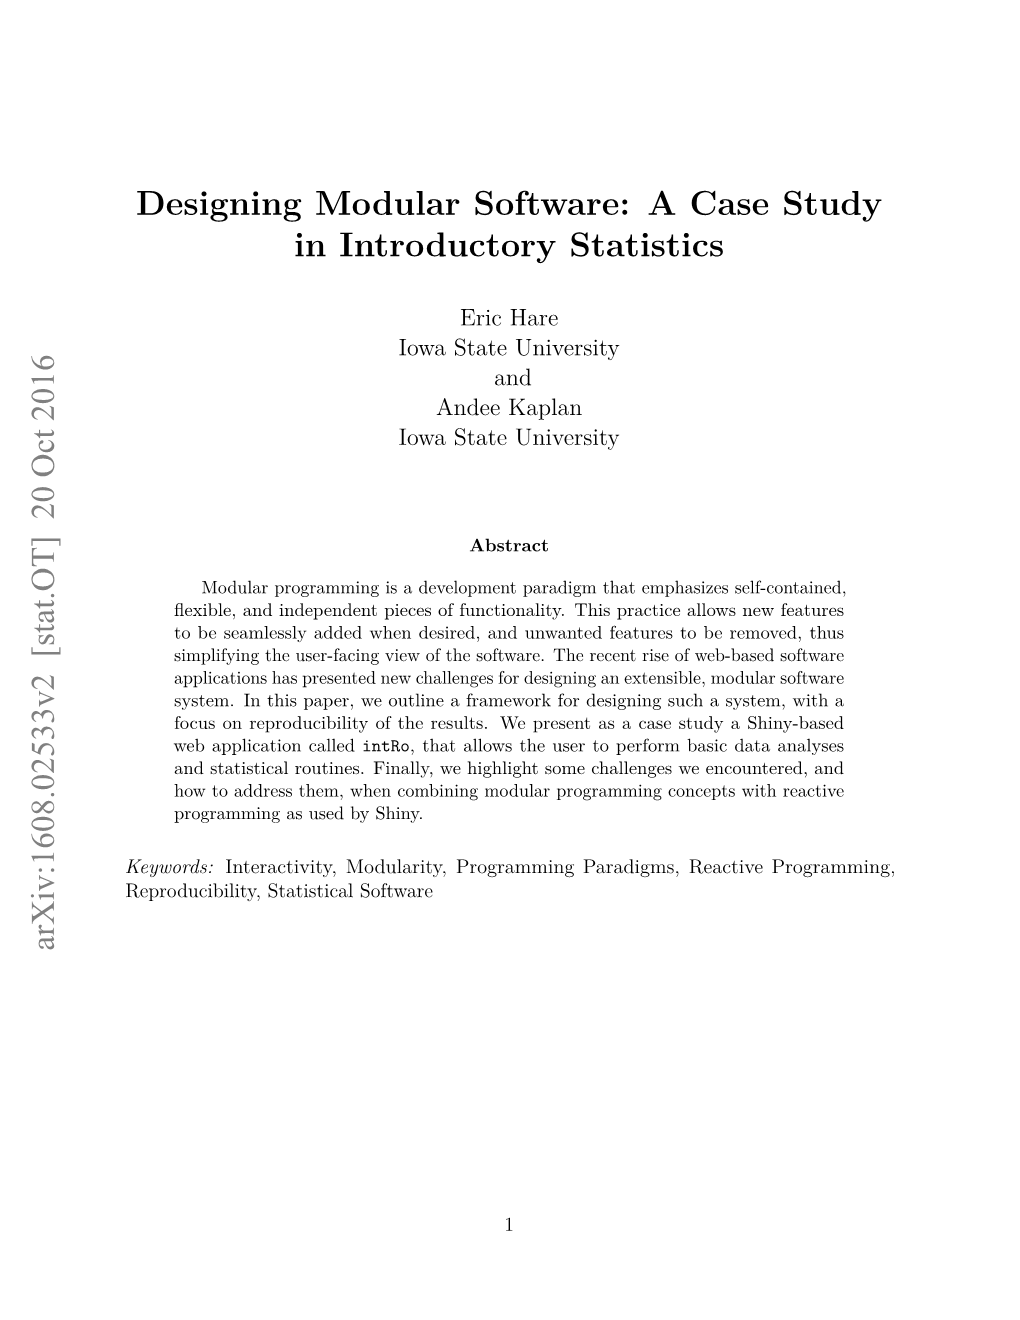 Designing Modular Software: a Case Study in Introductory Statistics